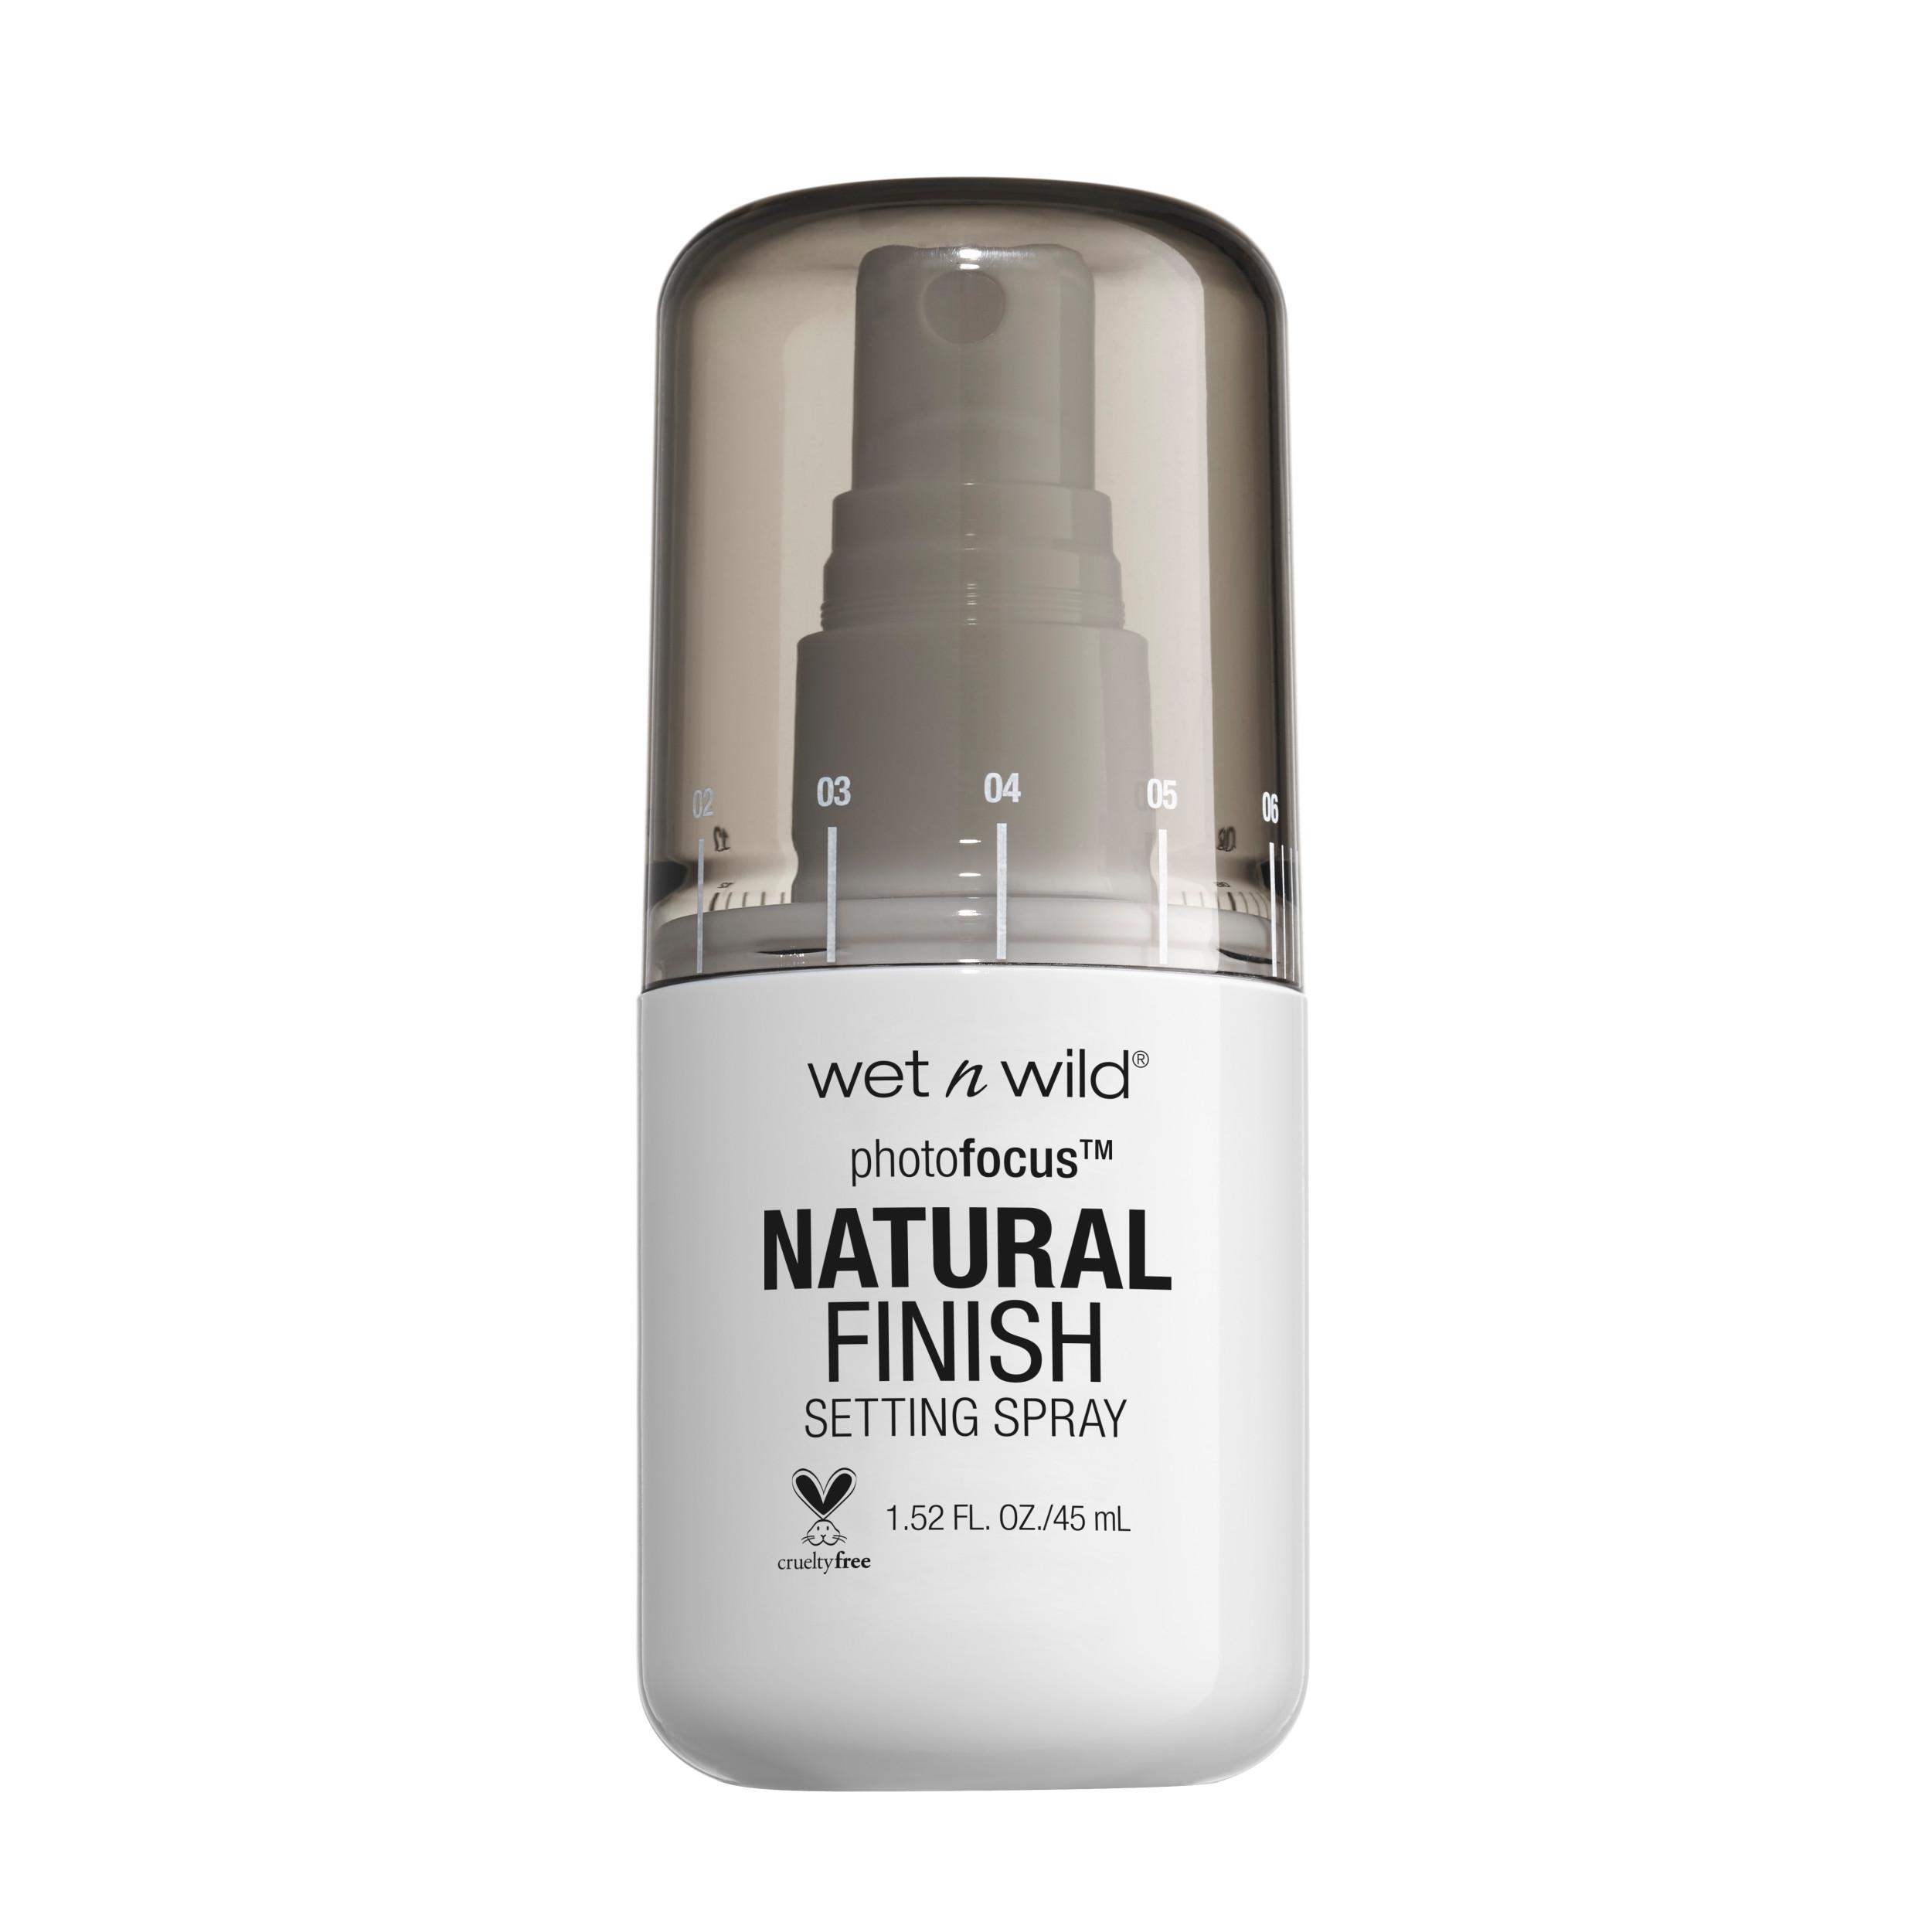 wet n wild Photo Focus Natural Finish Setting Spray, Seal the Deal - image 1 of 4